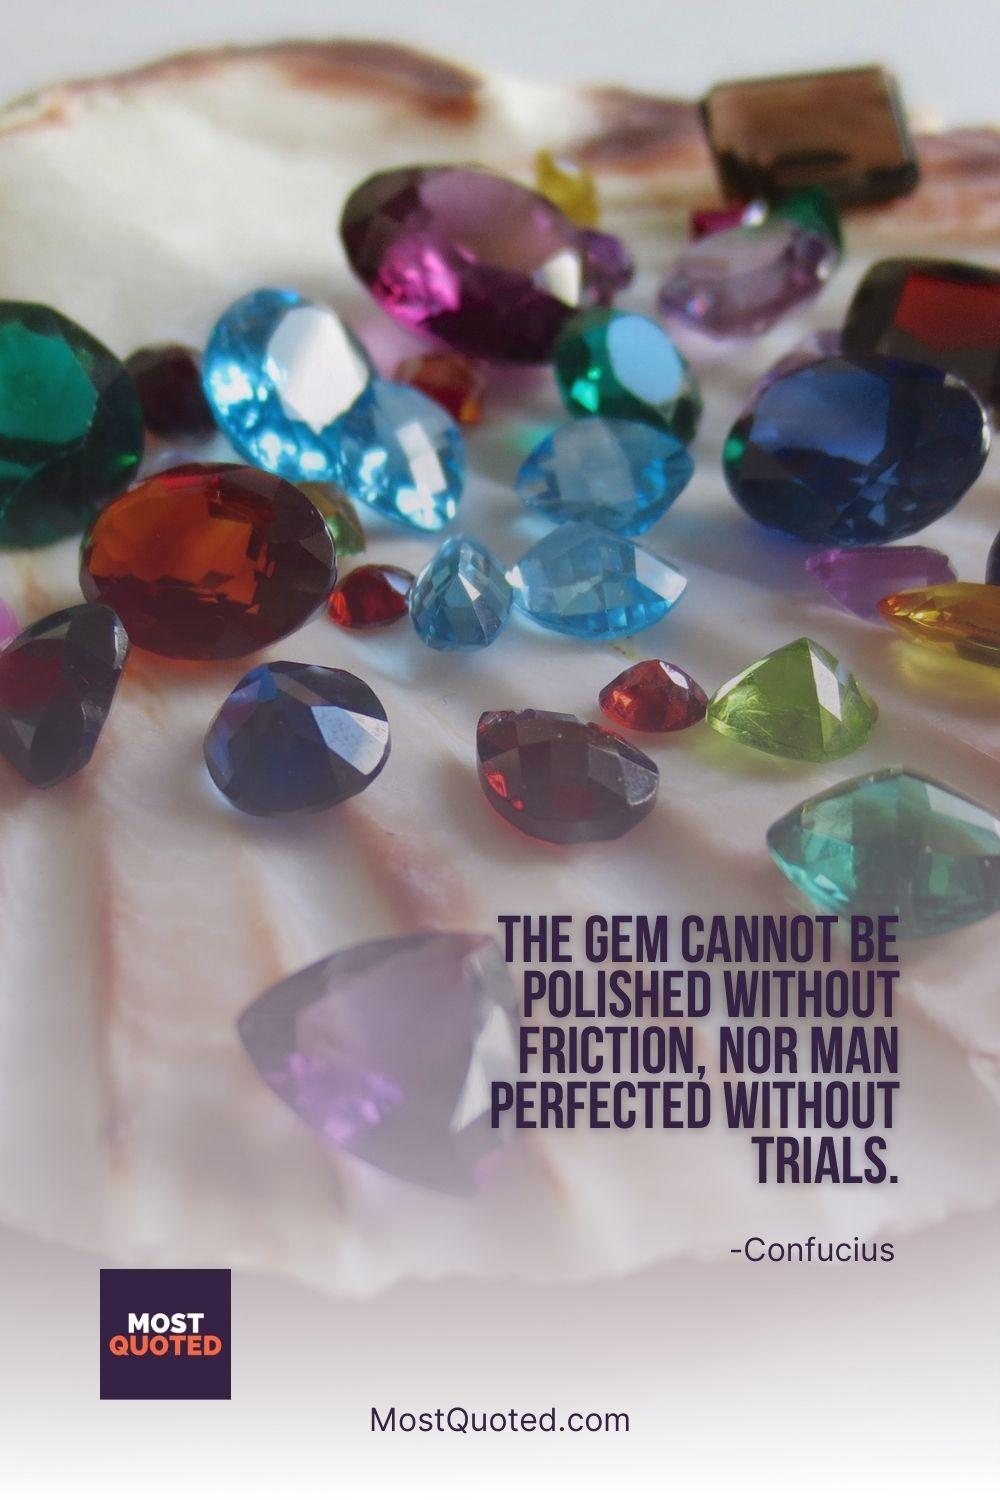 The gem cannot be polished without friction, nor man perfected without trials. - Confucius